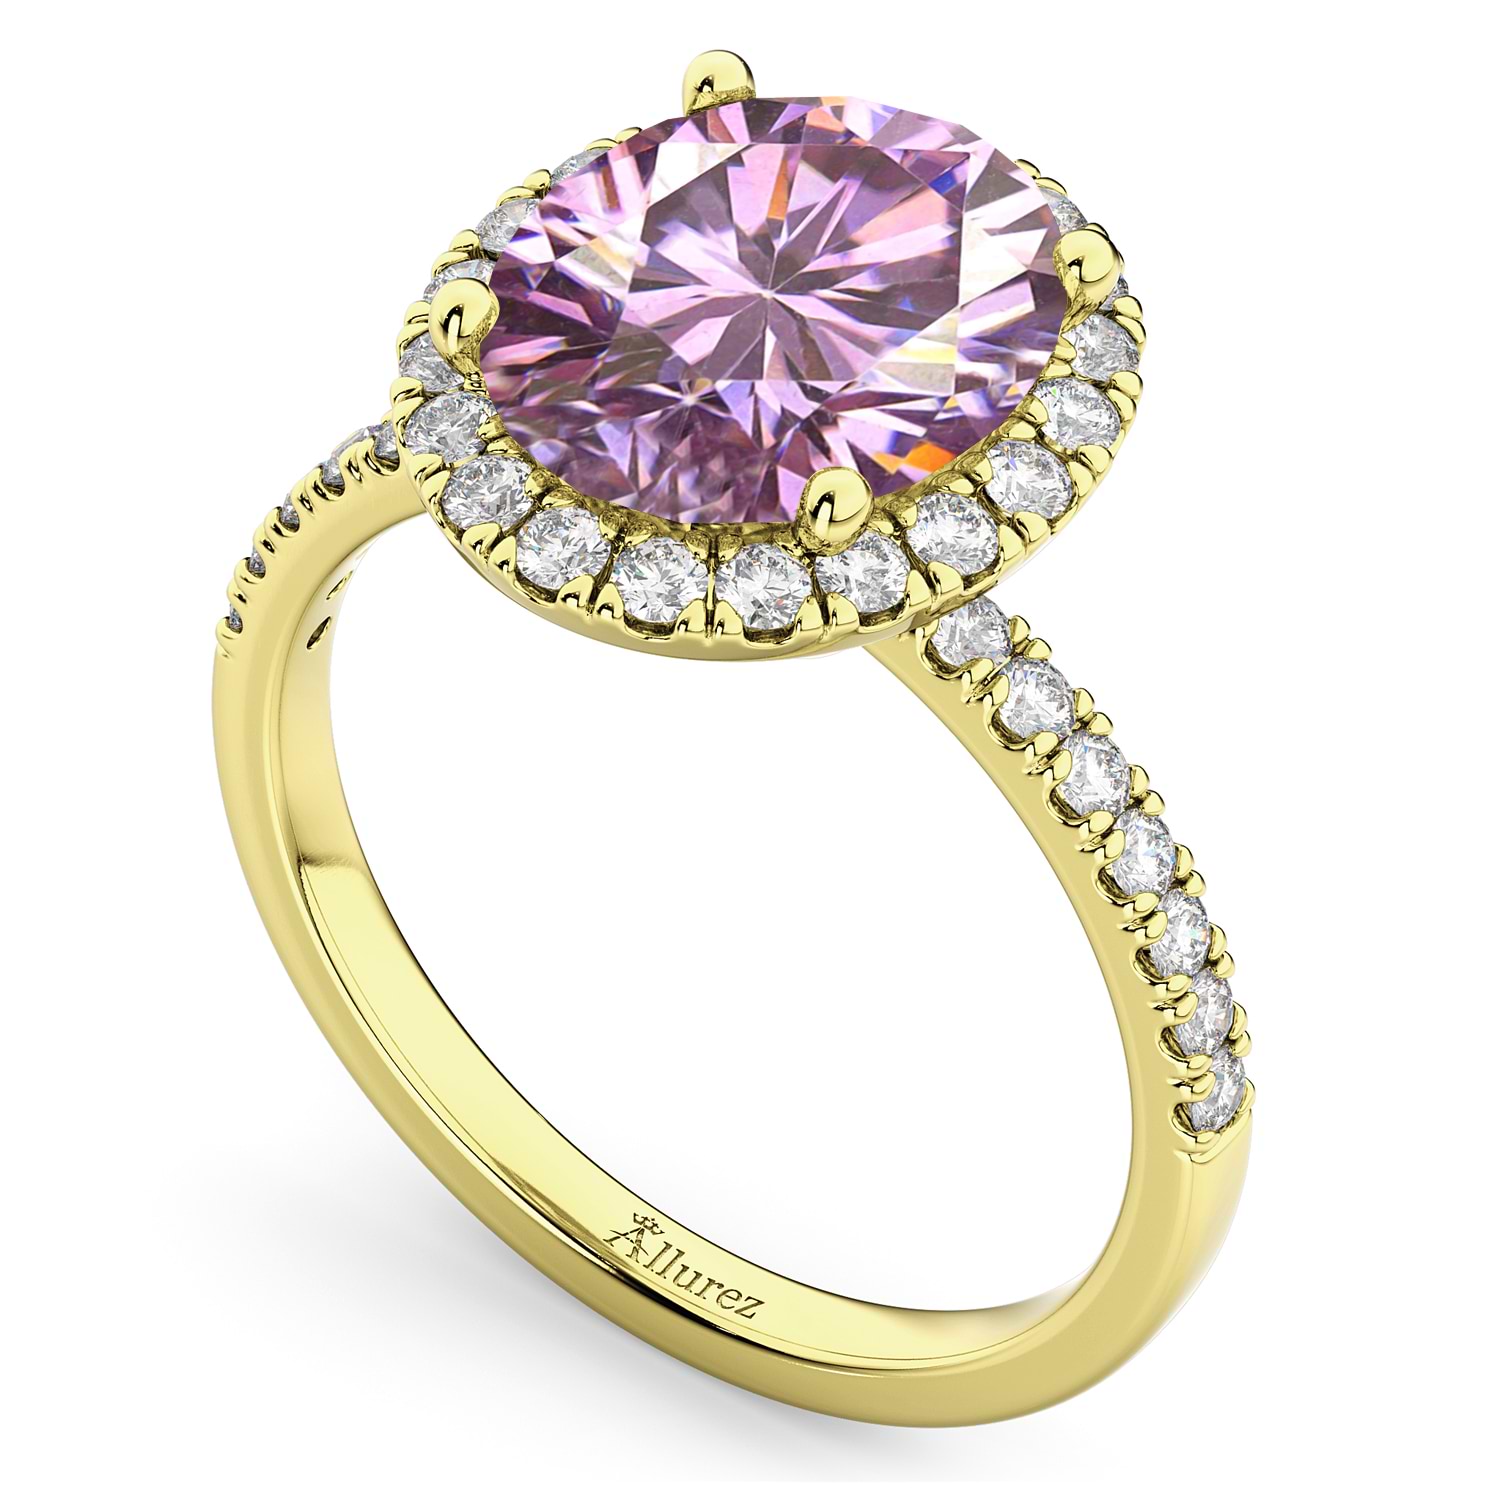 Oval Cut Halo Pink Moissanite & Diamond Engagement Ring 14K Yellow Gold 2.72ct